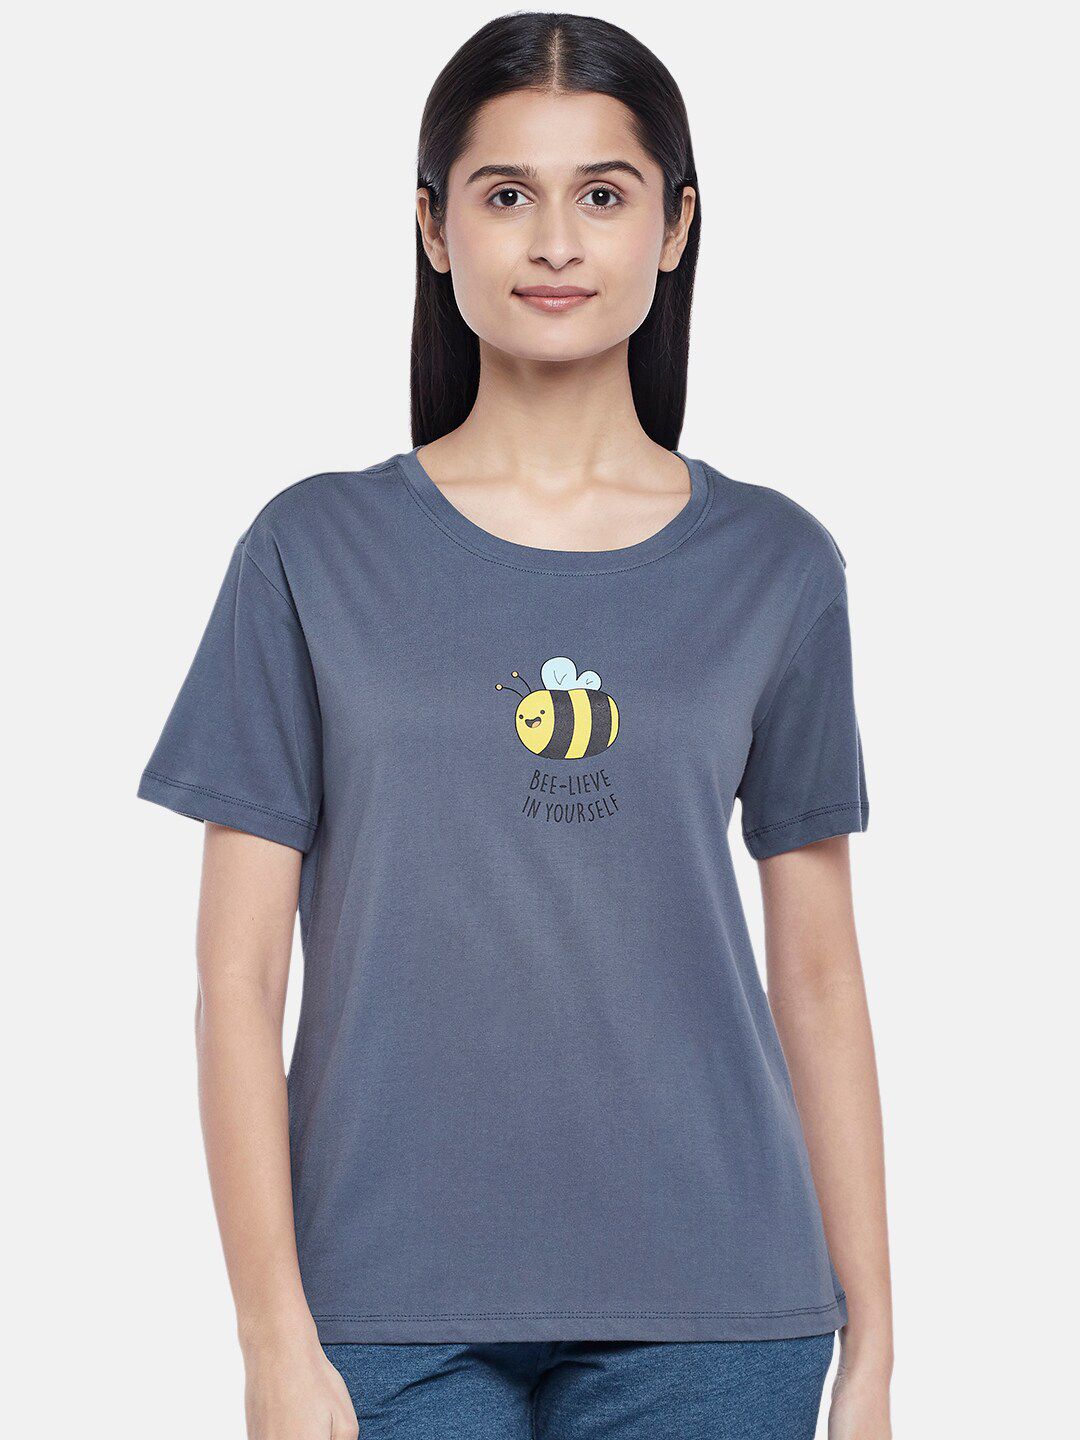 Dreamz by Pantaloons Charcoal Print Lounge tshirt Price in India